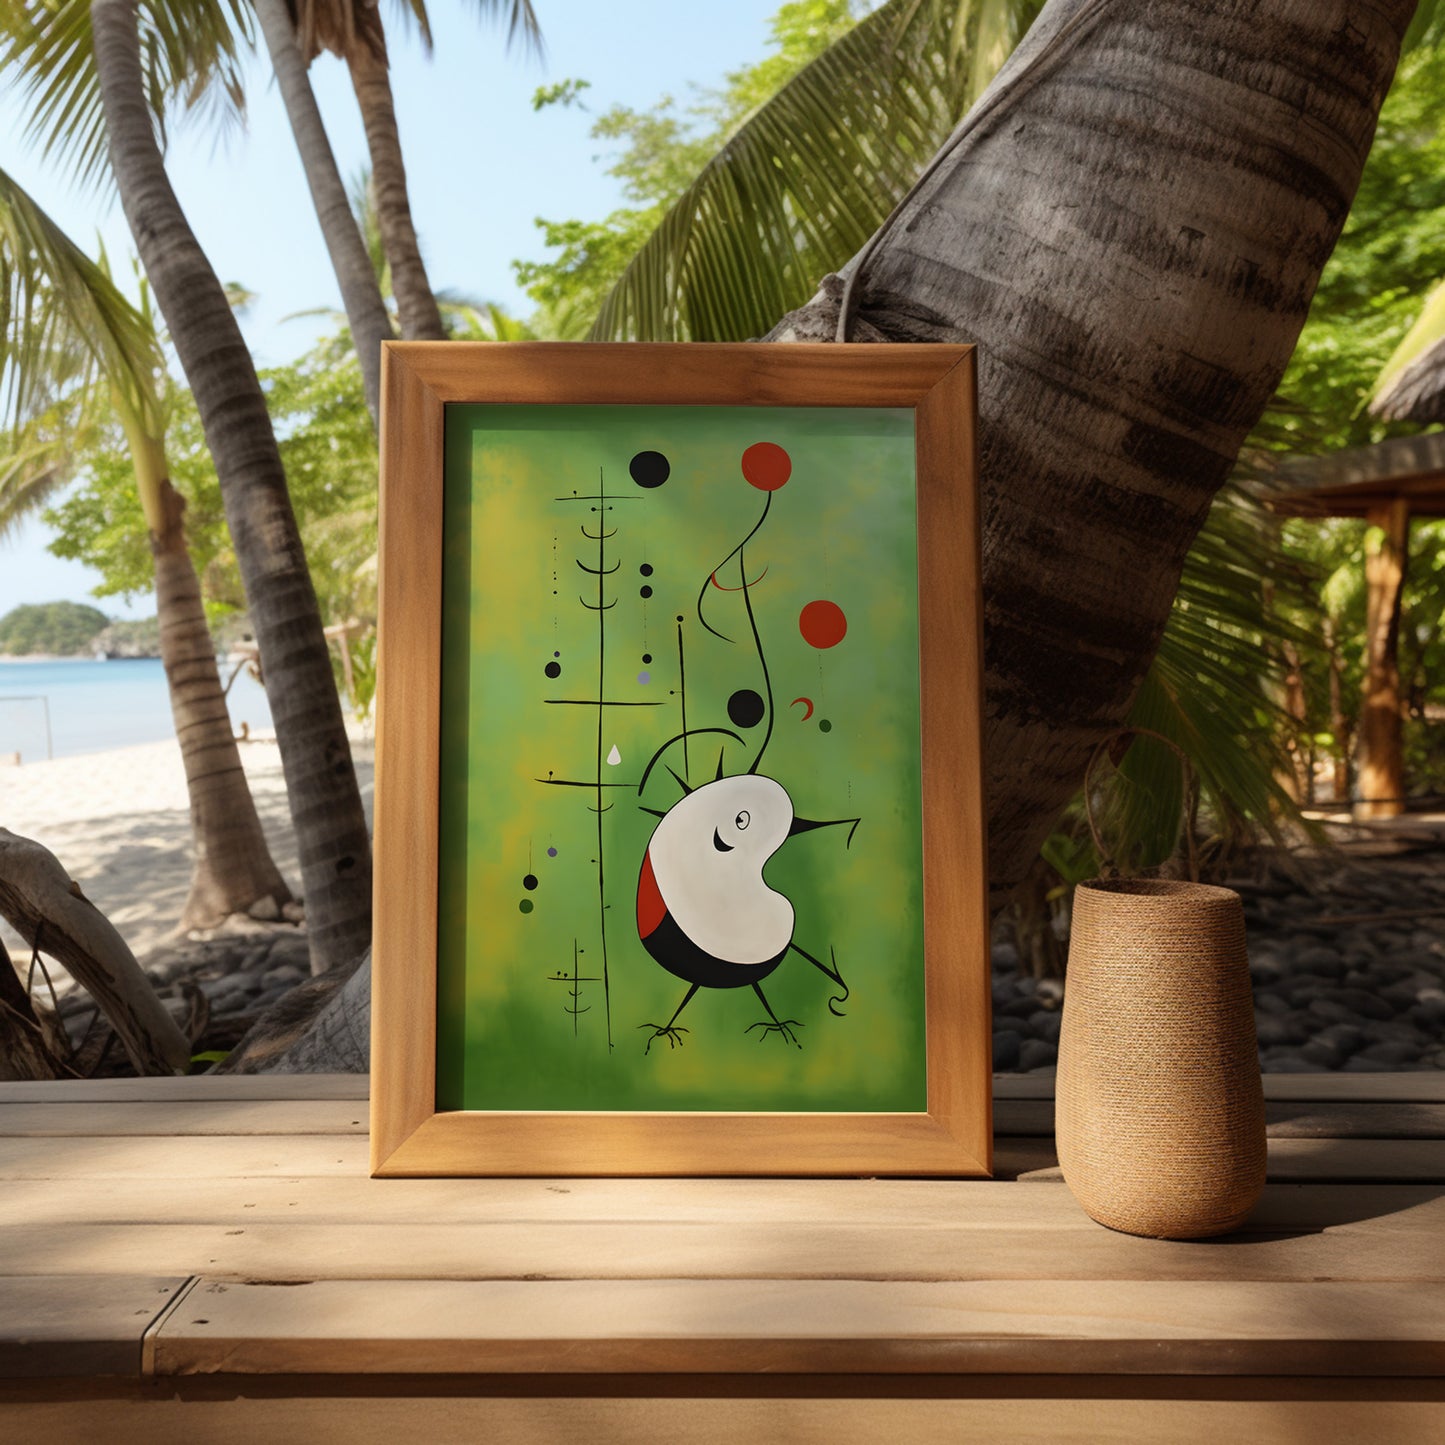 Framed abstract art featuring a whimsical bird on a table by the beach.